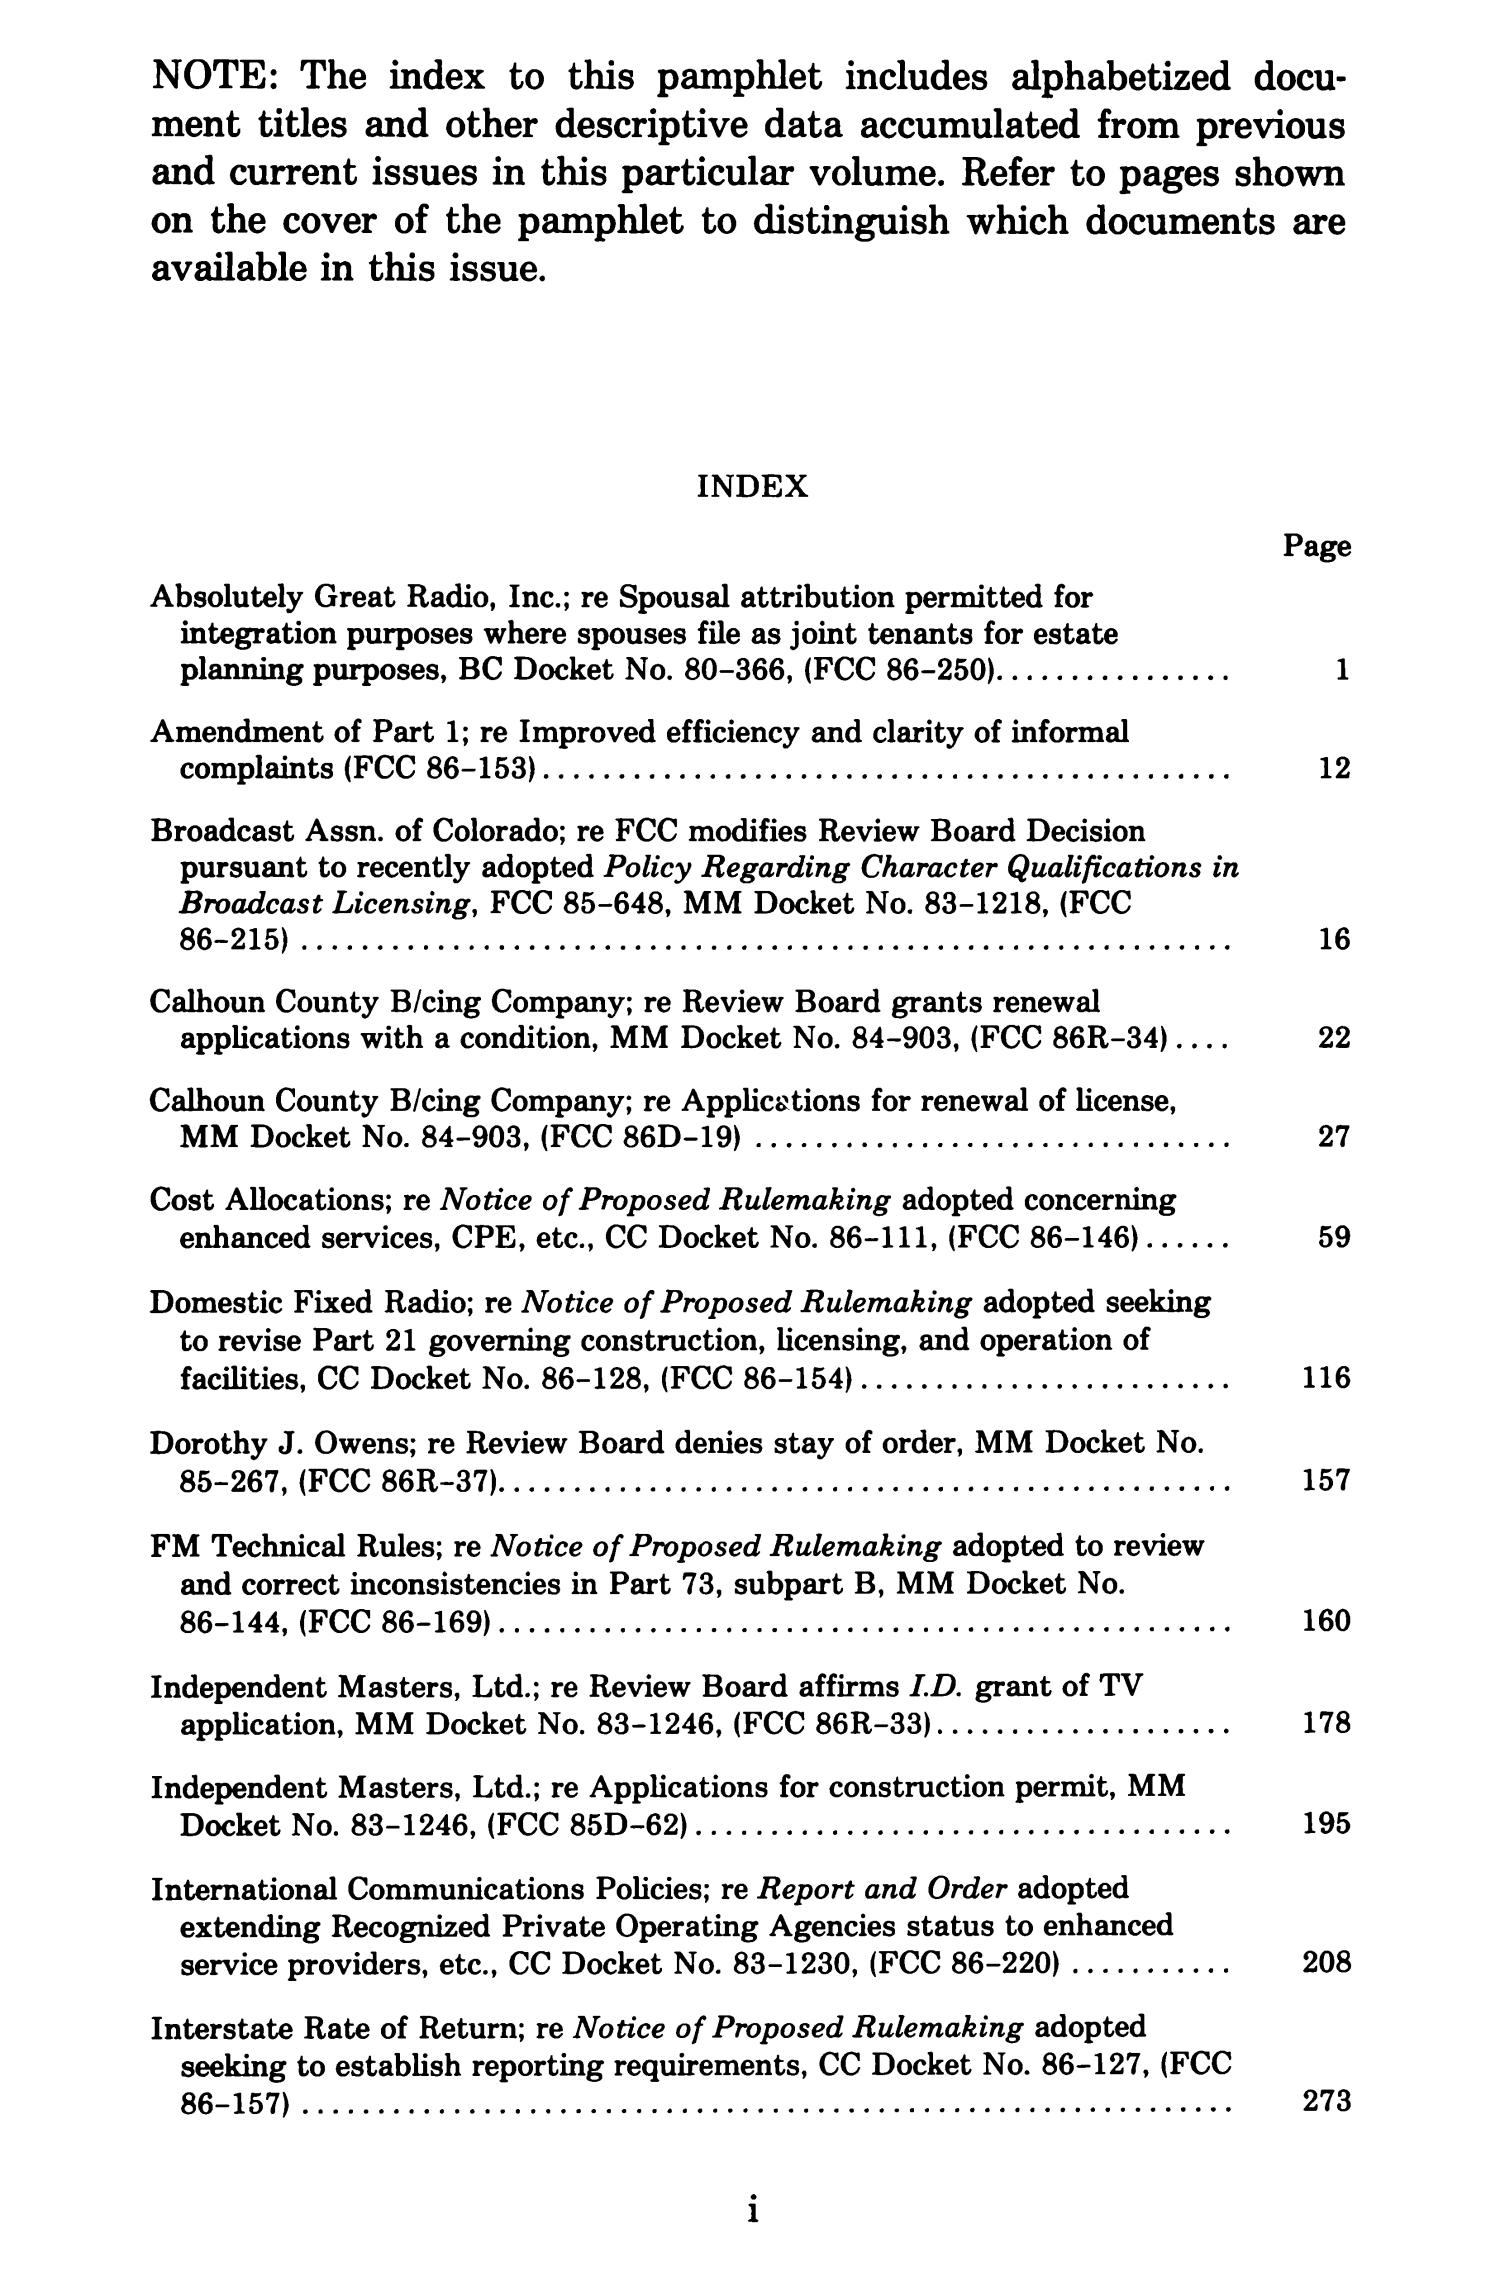 FCC Reports, Second Series, Volume 104, Number 1, Pages 1 to 374, July 1986
                                                
                                                    I
                                                